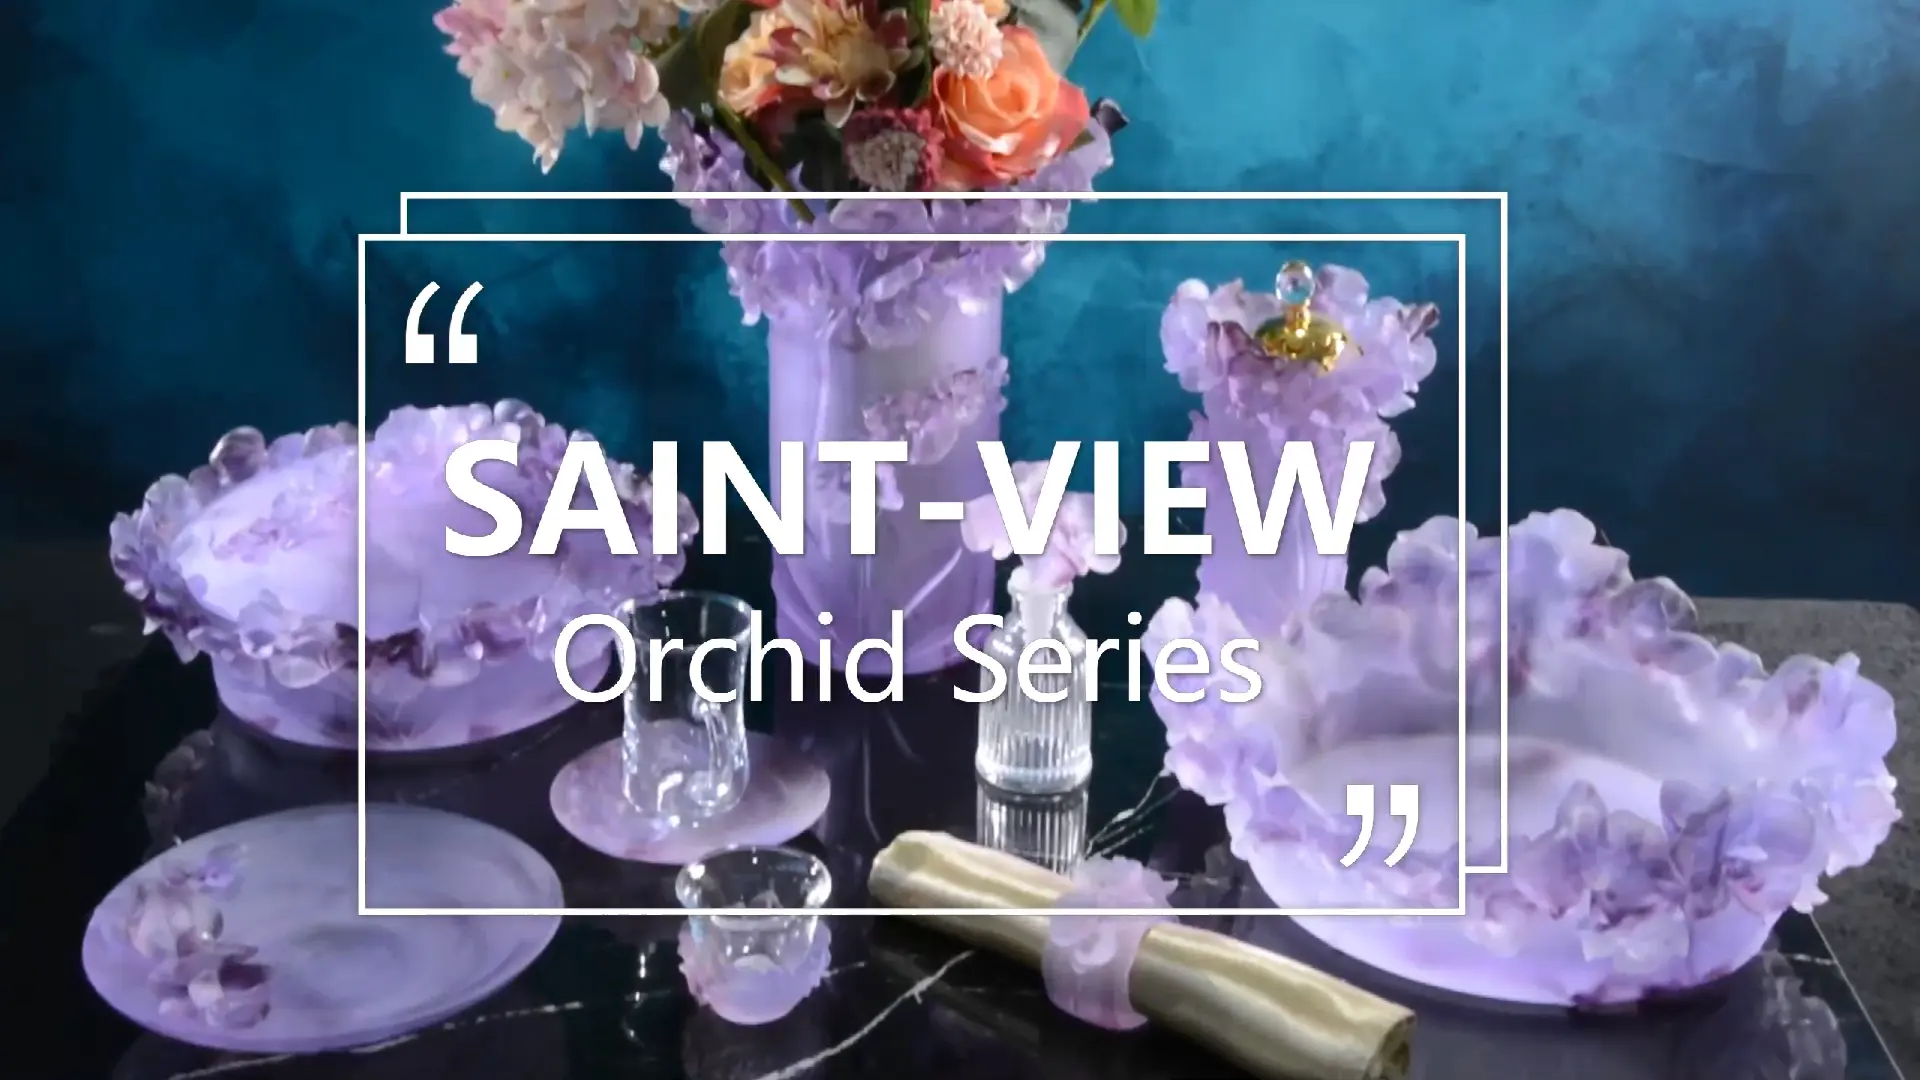 SAINT-VIEW Crystal Art 2021 New Nordic Style Orhcid Flower Wedding Party Decor Centerpieces